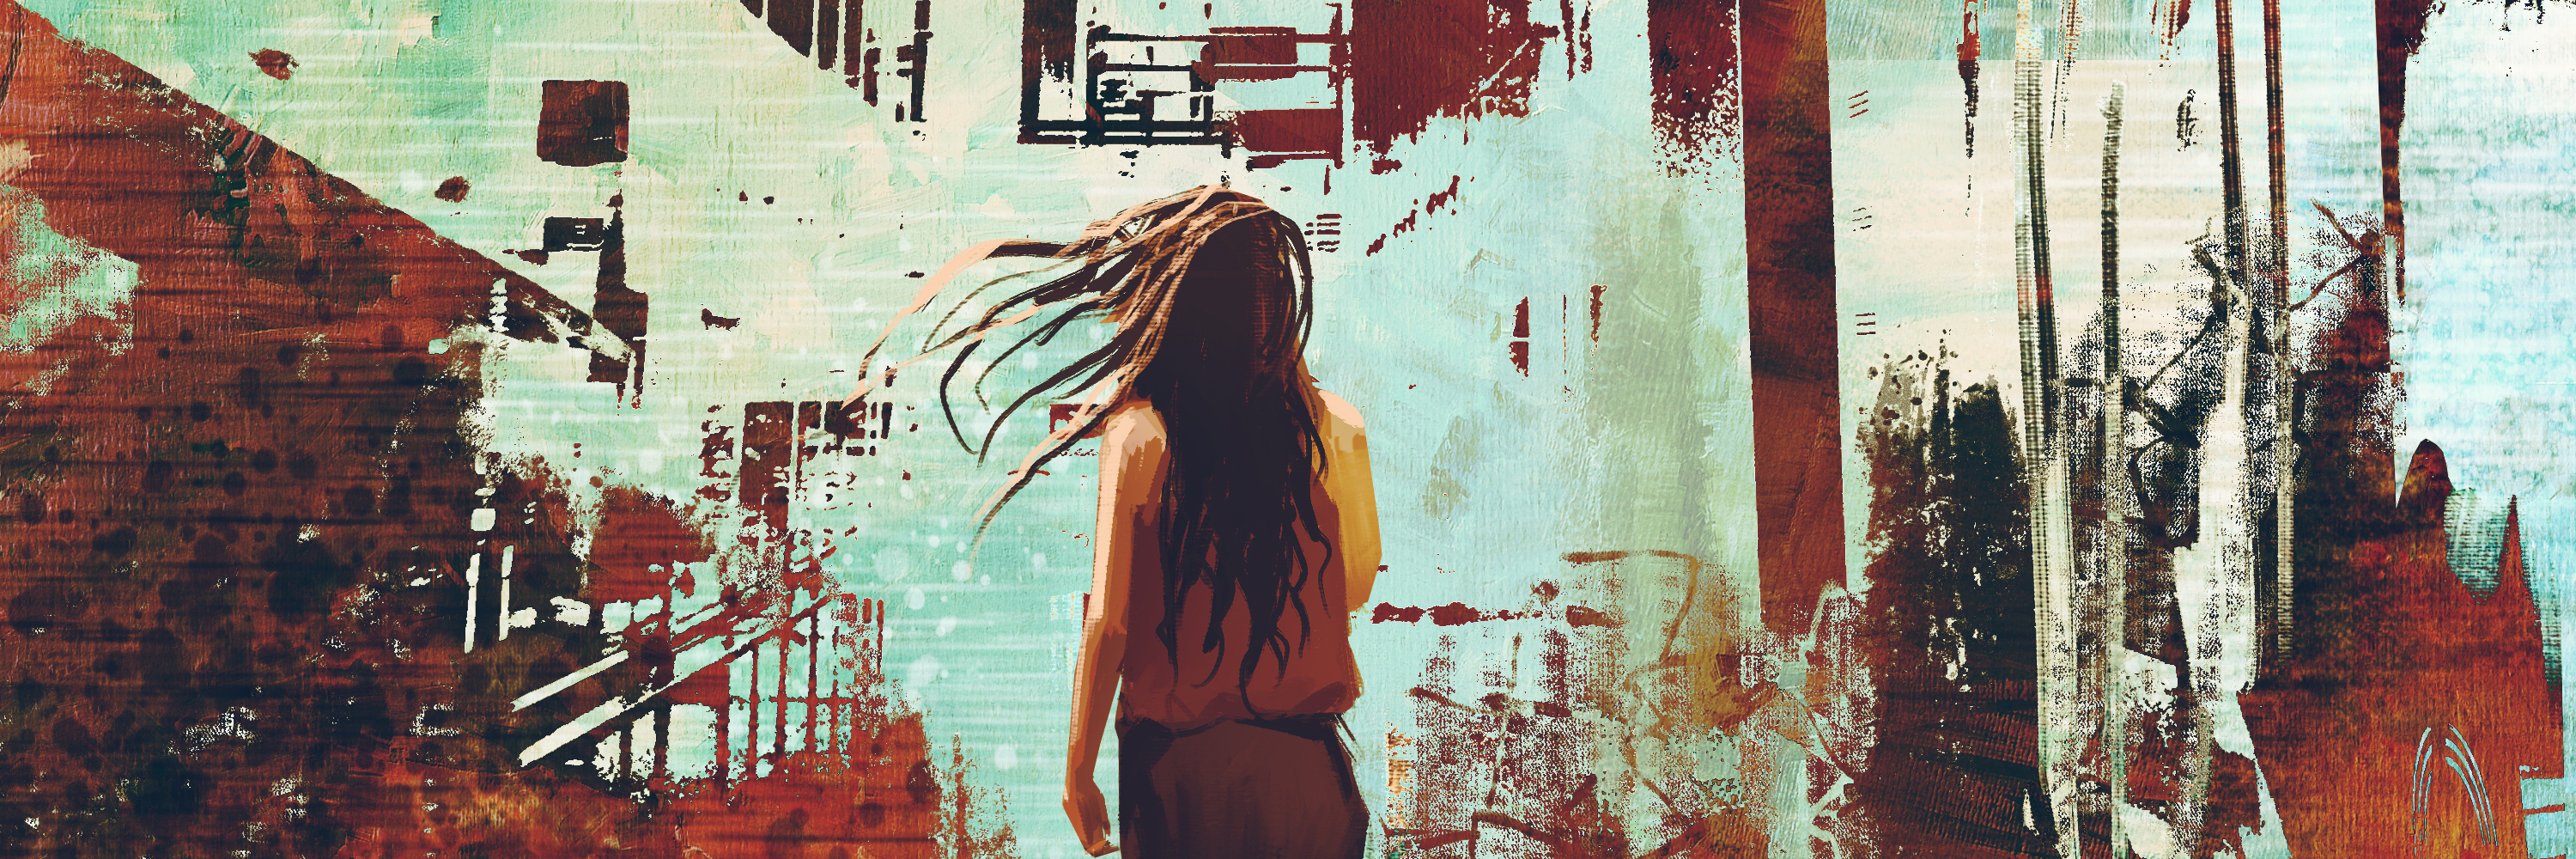 woman standing against abstract achitecture with grunge texture,illustration art